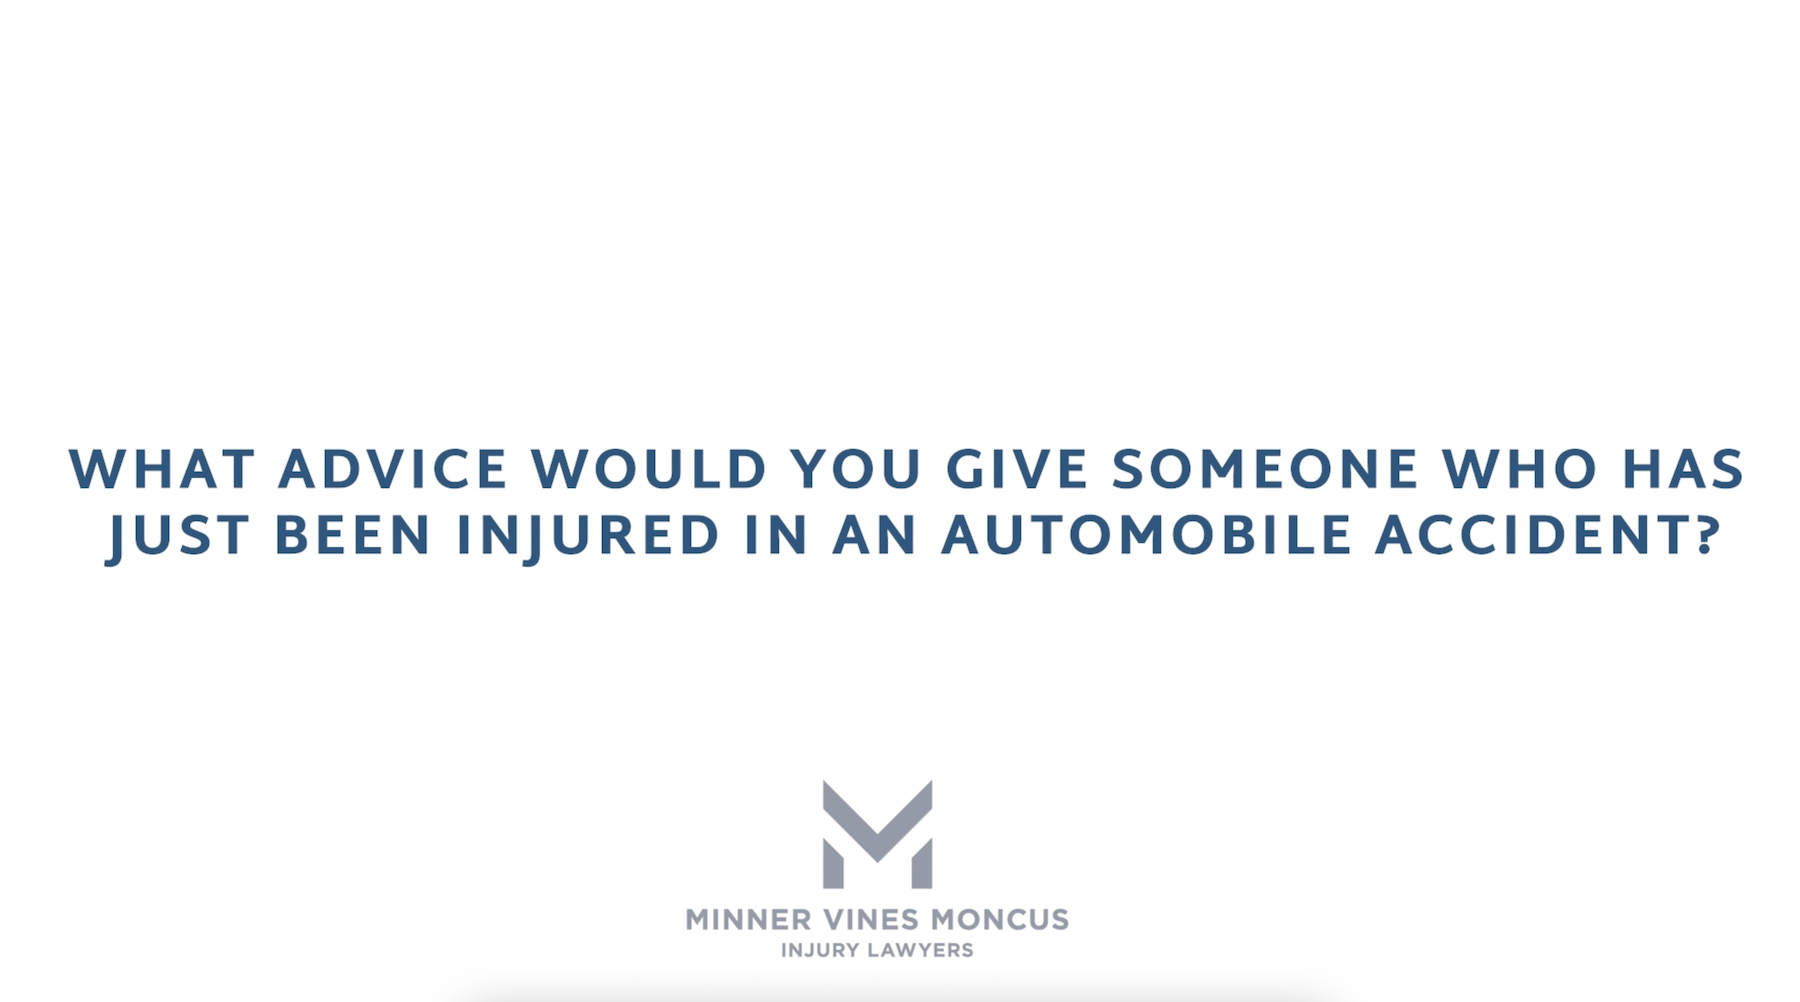 What advice would you give someone who has just been injured in an automobile accident?